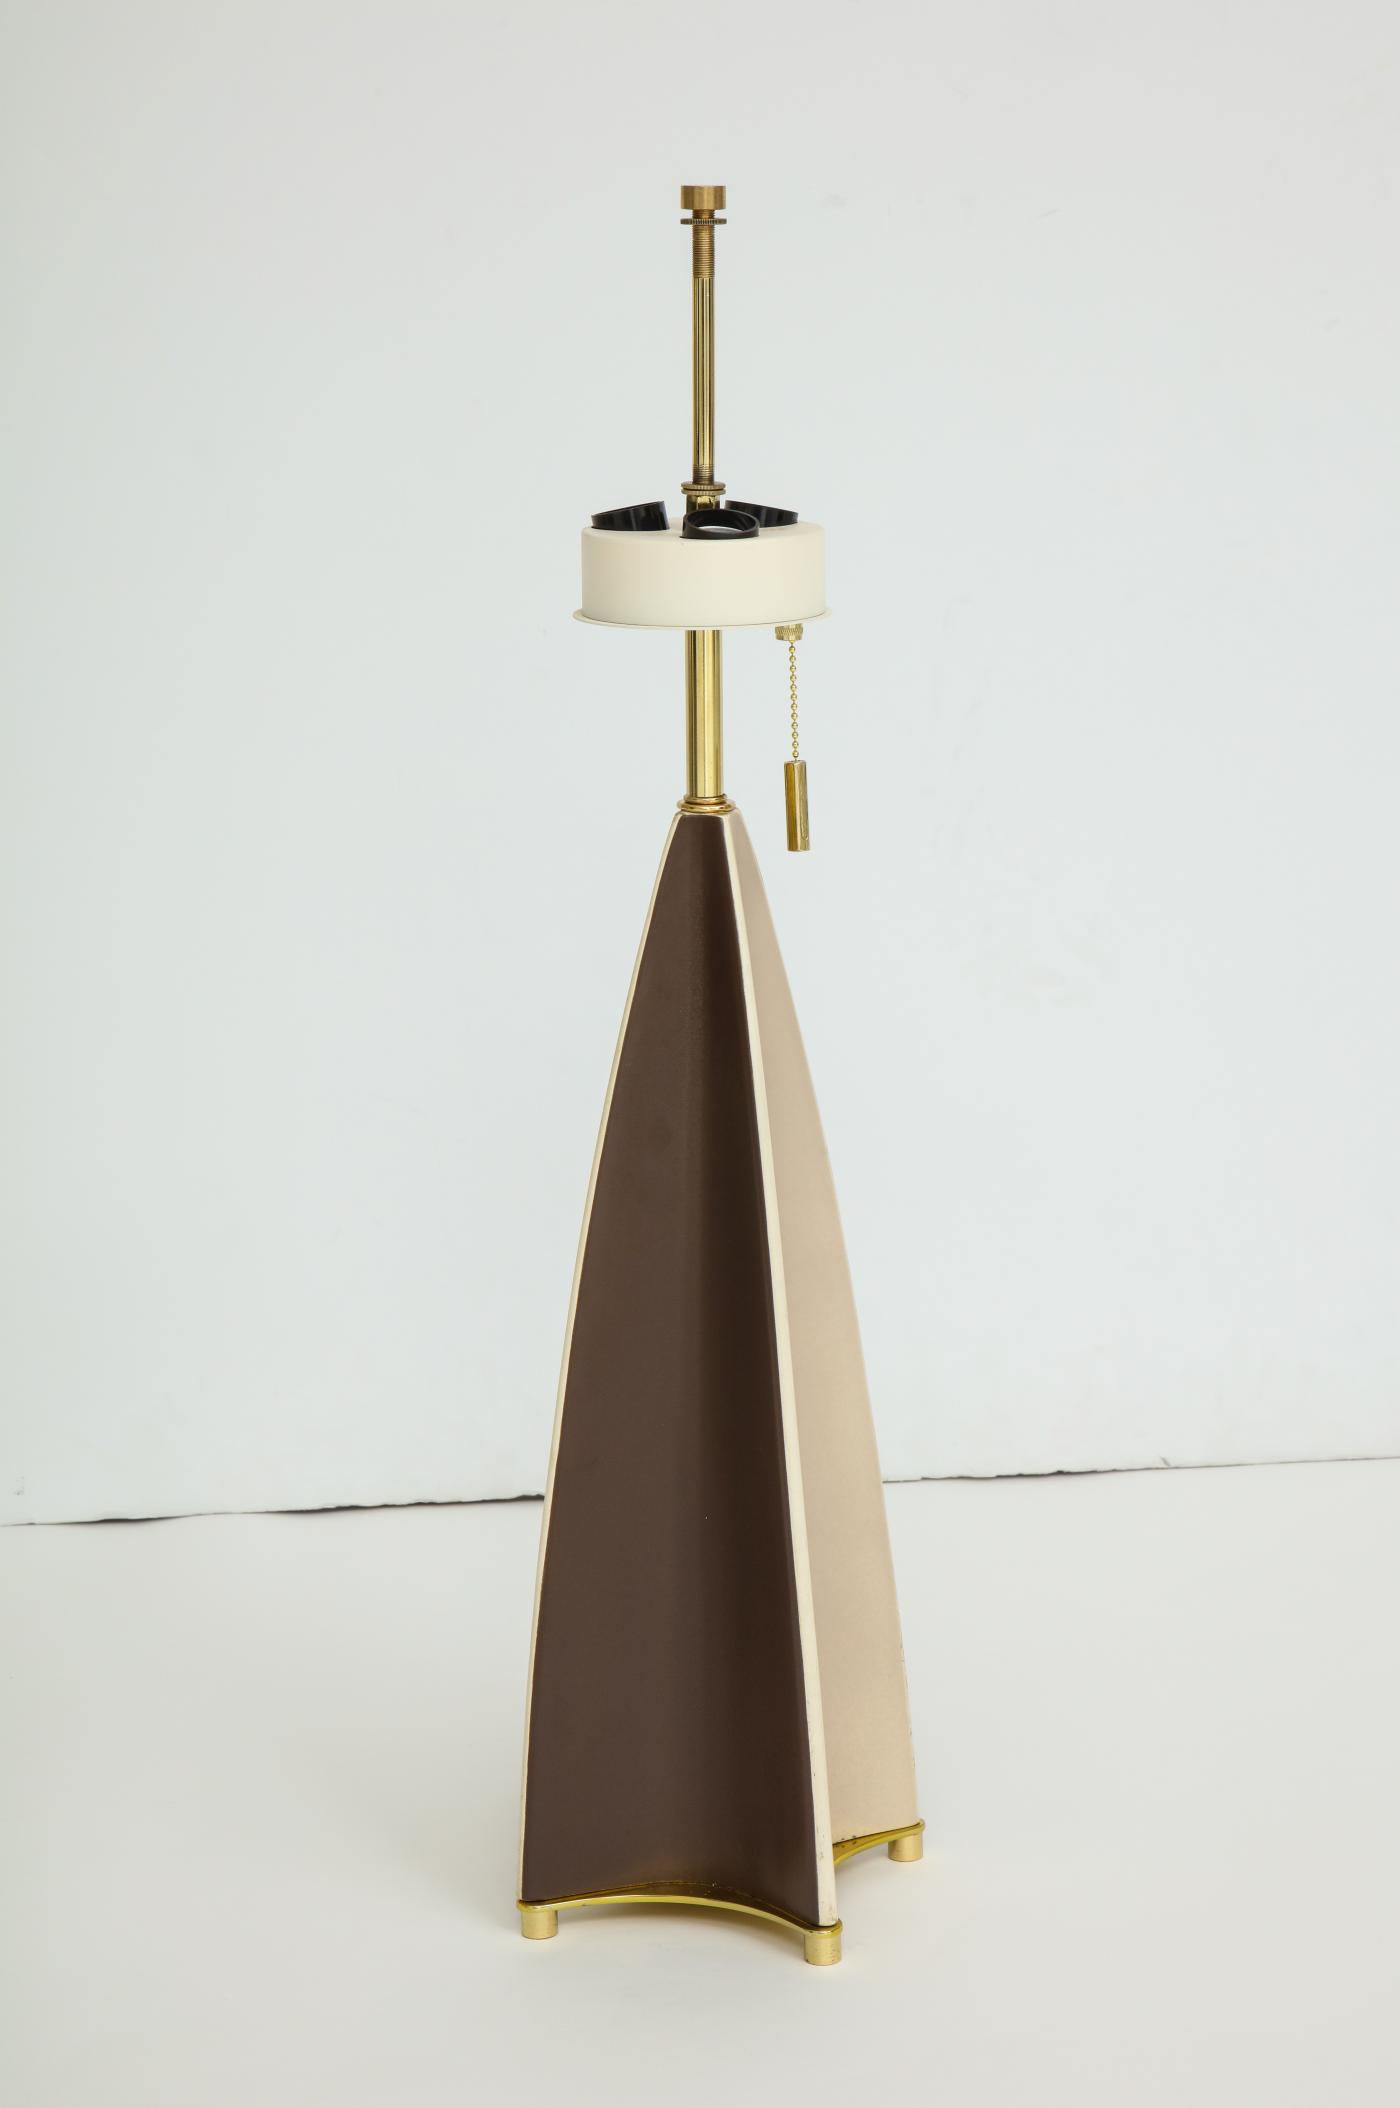 Parabolic Fin Table lamp by Gerald Thurston for Lightolier.